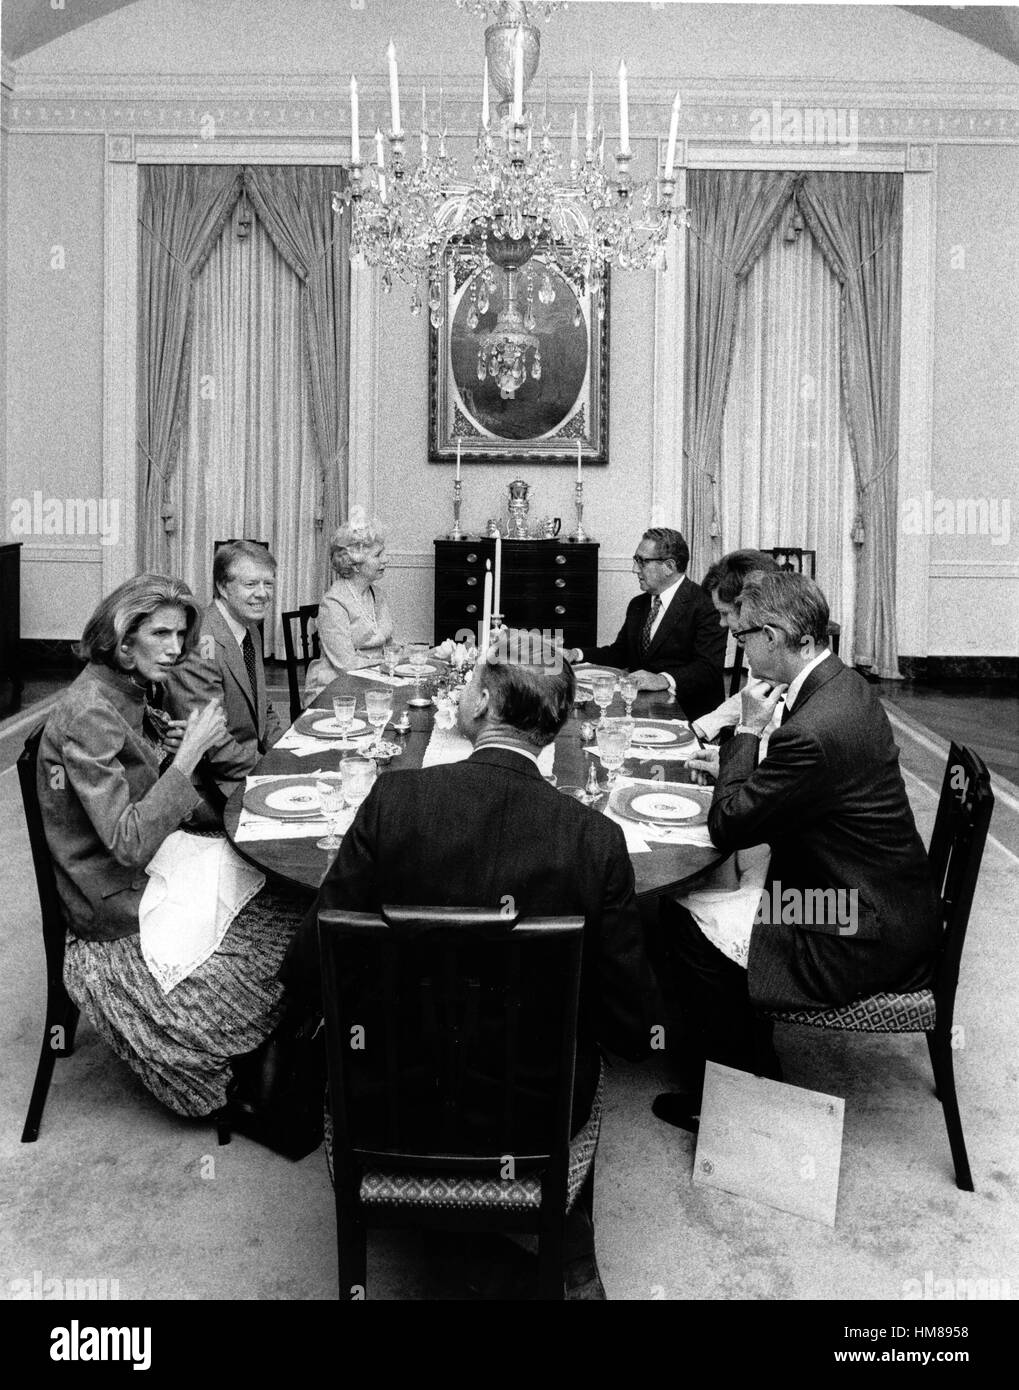 At dinner in the first floor dining room of the White House in Washington, DC, from left to right: Mrs. Nancy Kissinger, United States President Jimmy Carter, Mrs. Grace S. Vance, former US Secretary of State Dr. Henry A. Kissinger, first lady Rosalynn Ca Stock Photo